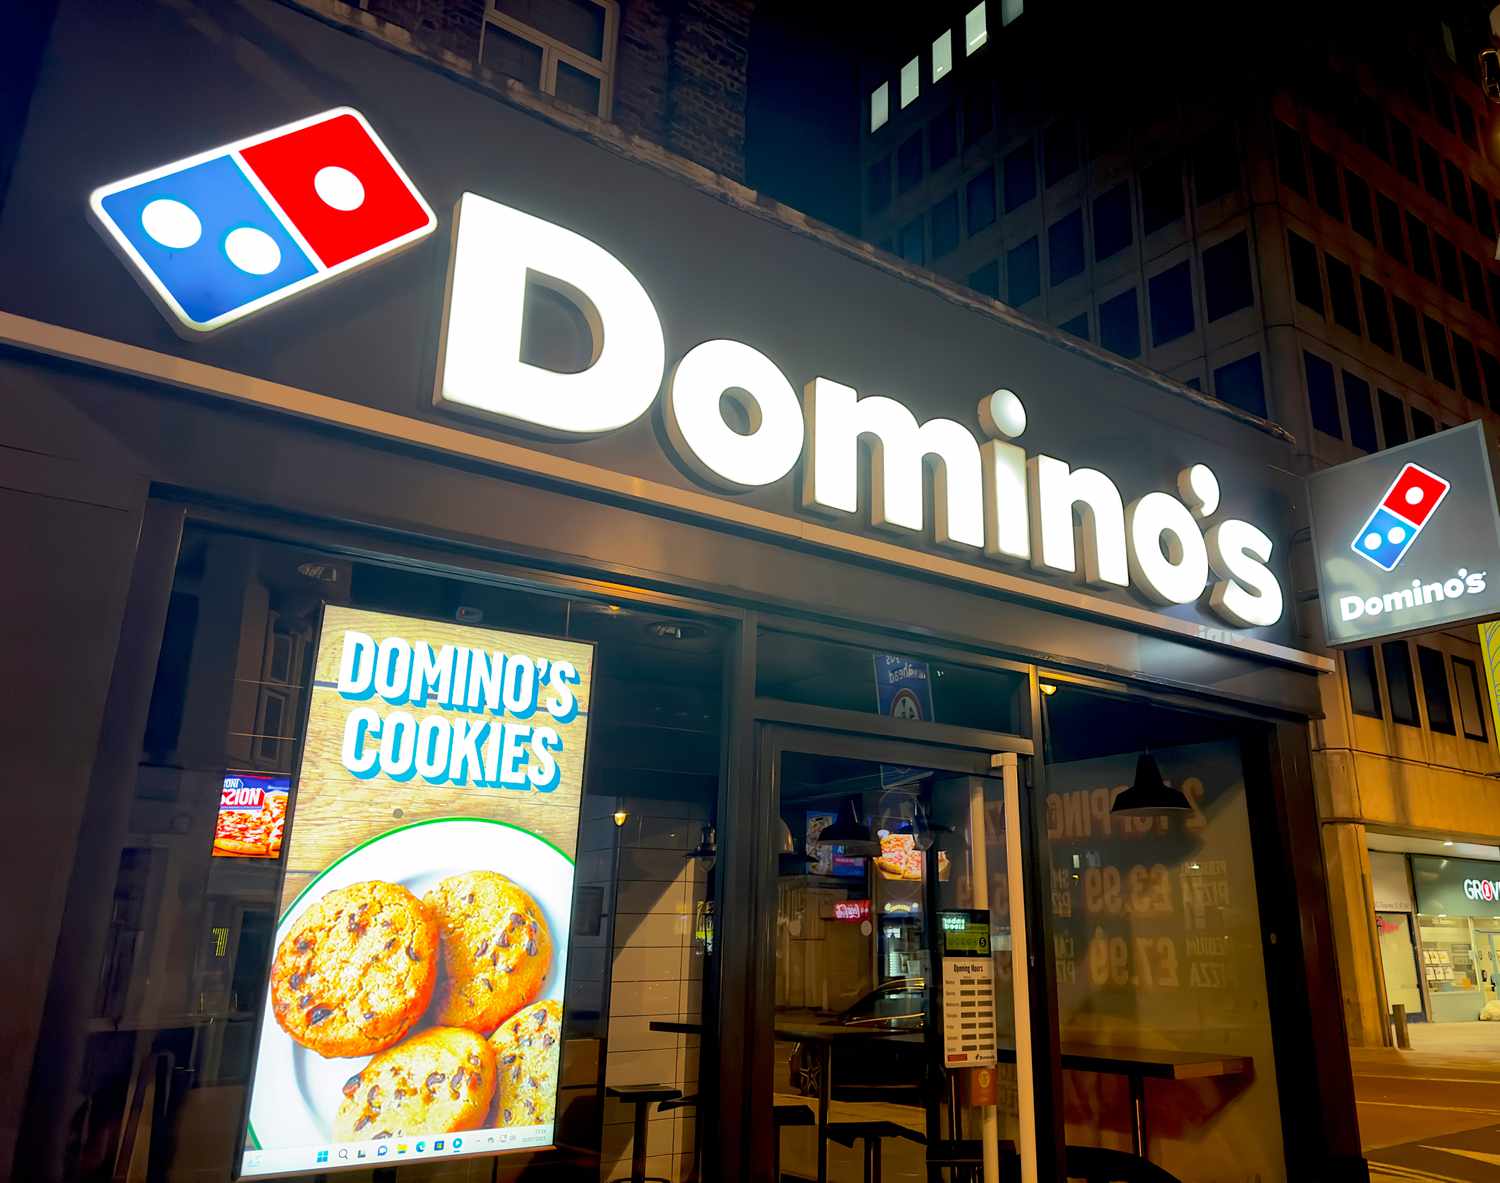 Domino’s Stock Falls After Pizza Giant’s Sales Miss Estimates [Video]